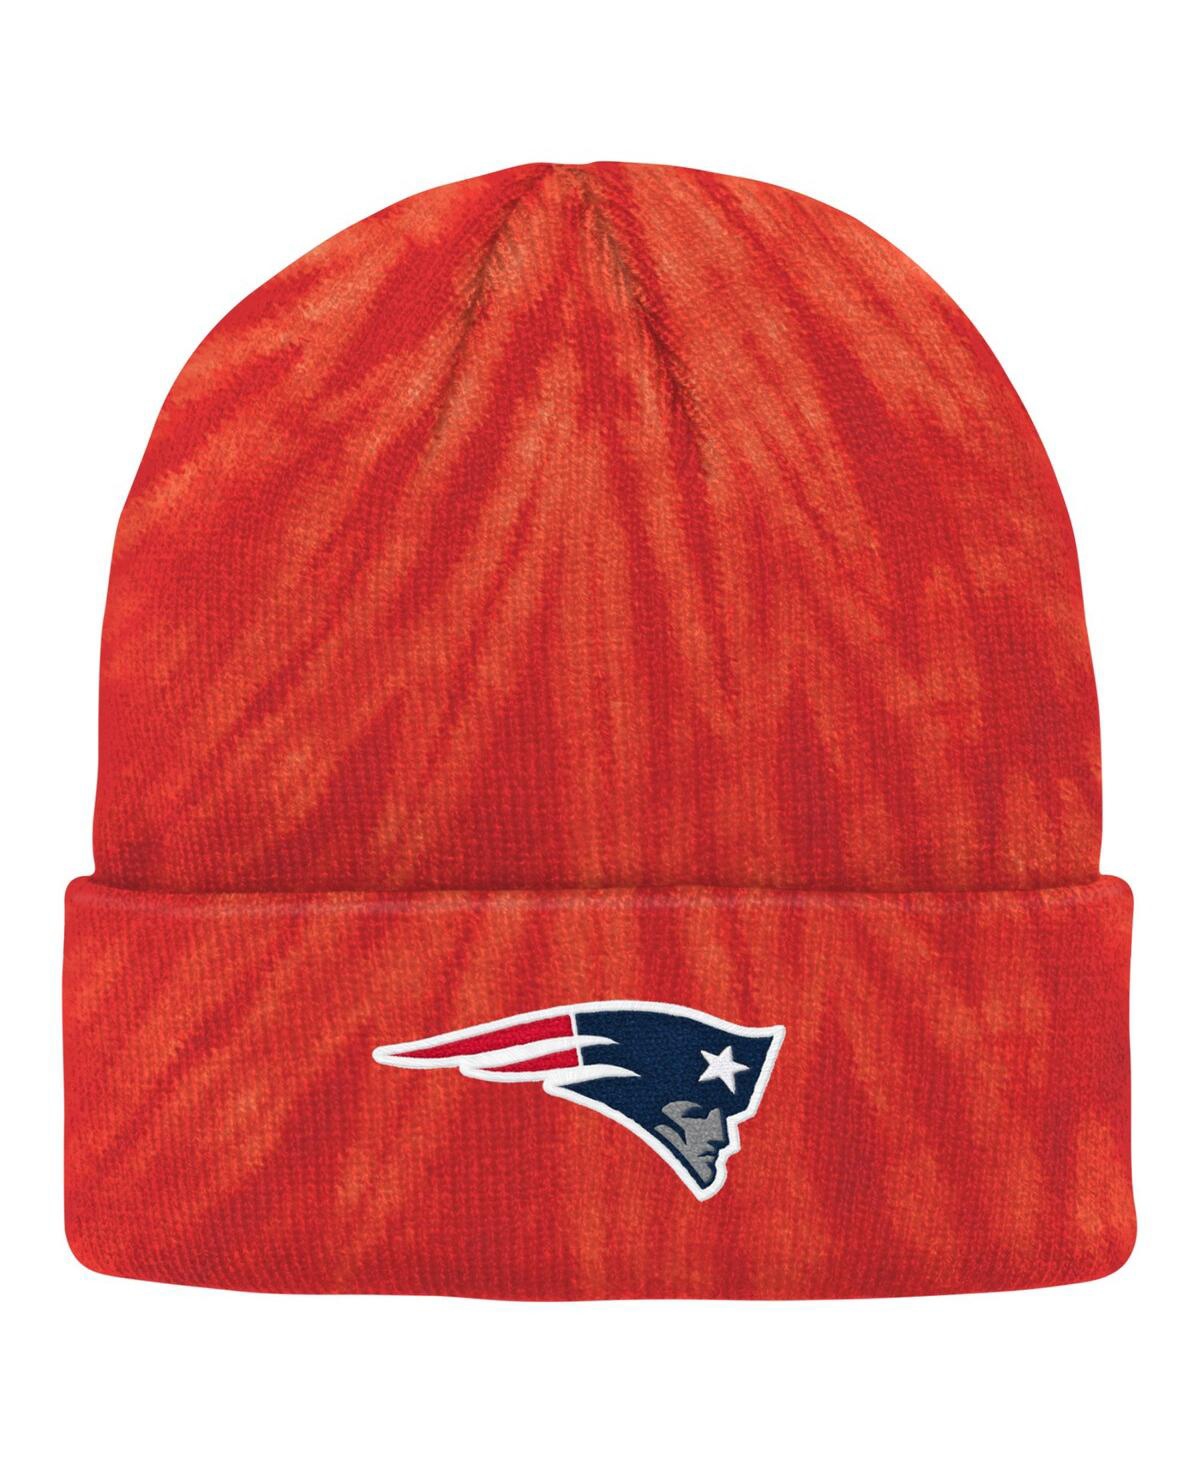 Outerstuff Kids' Big Boys And Girls Red New England Patriots Tie-dye Cuffed Knit Hat